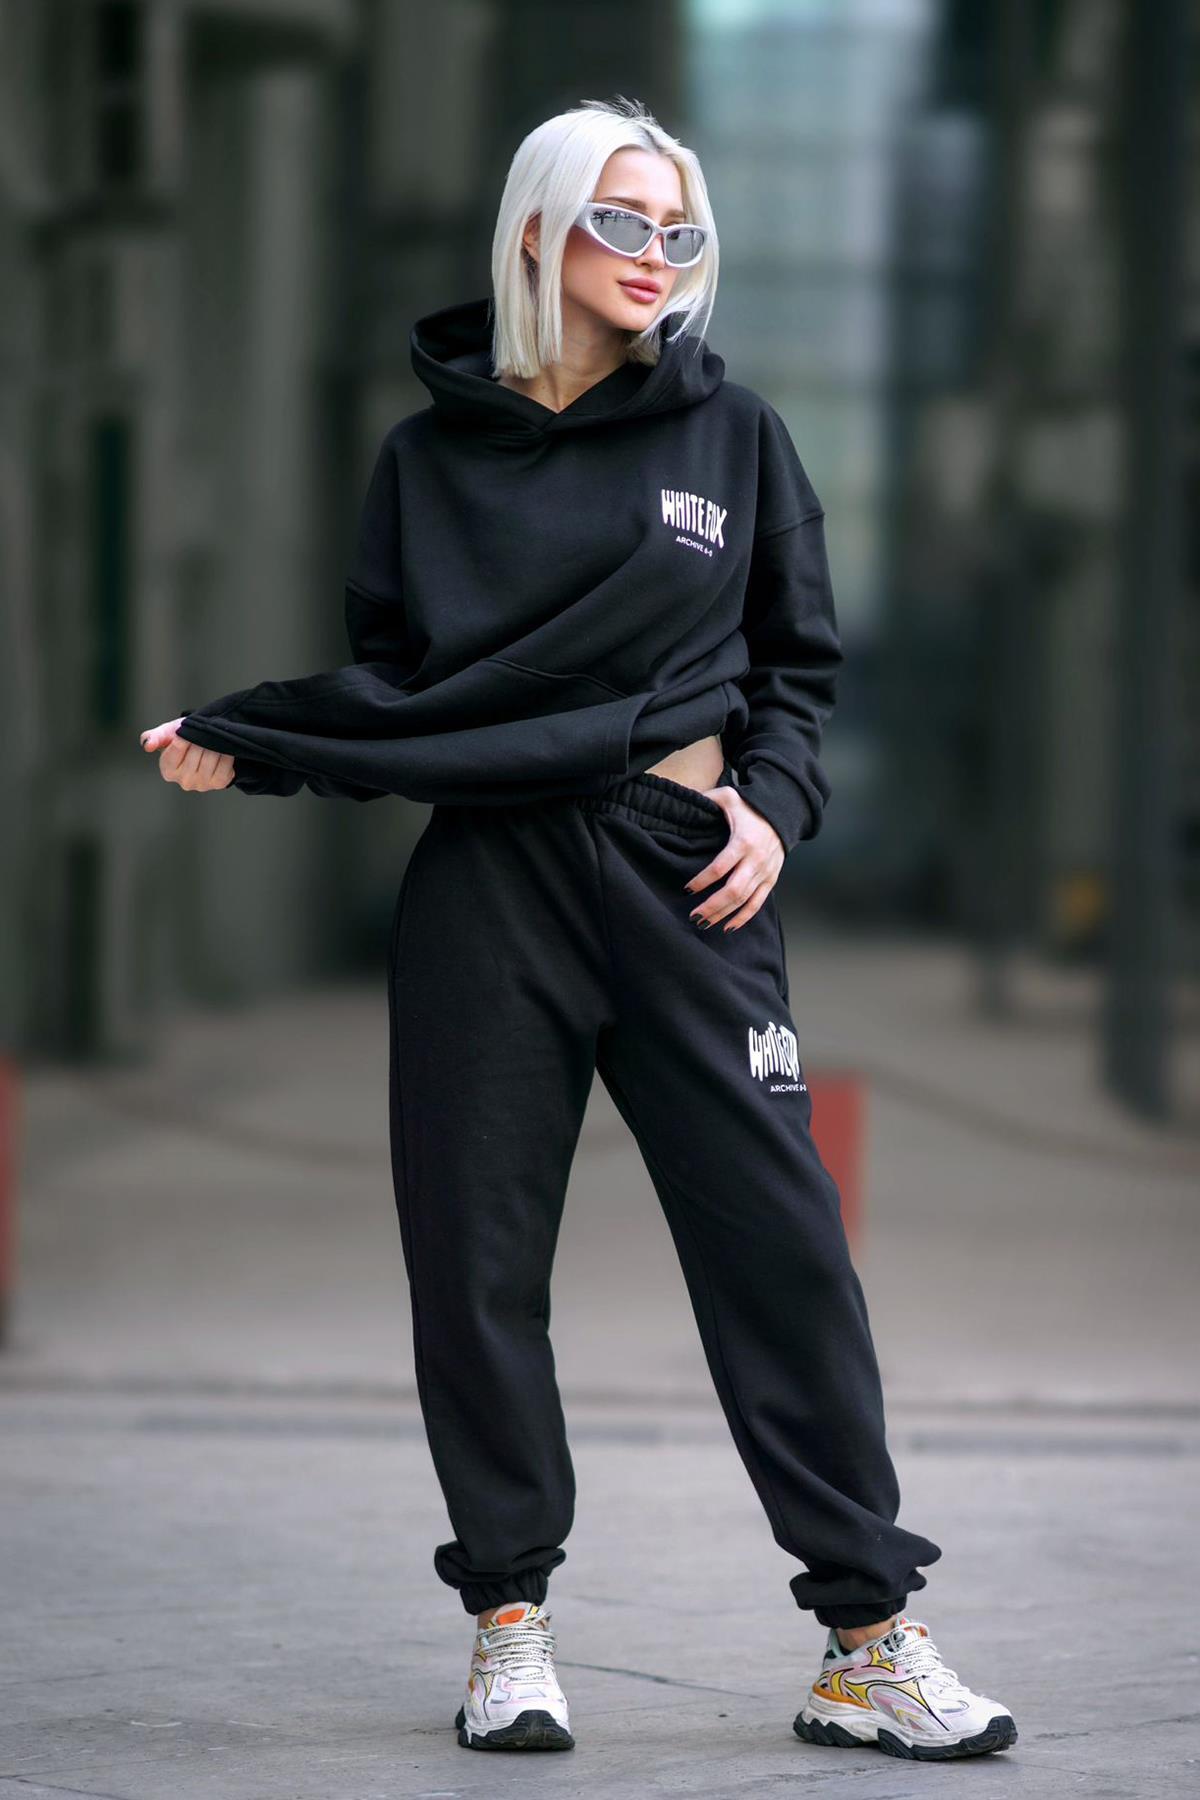 Madmext Women's Black Hooded Tracksuit